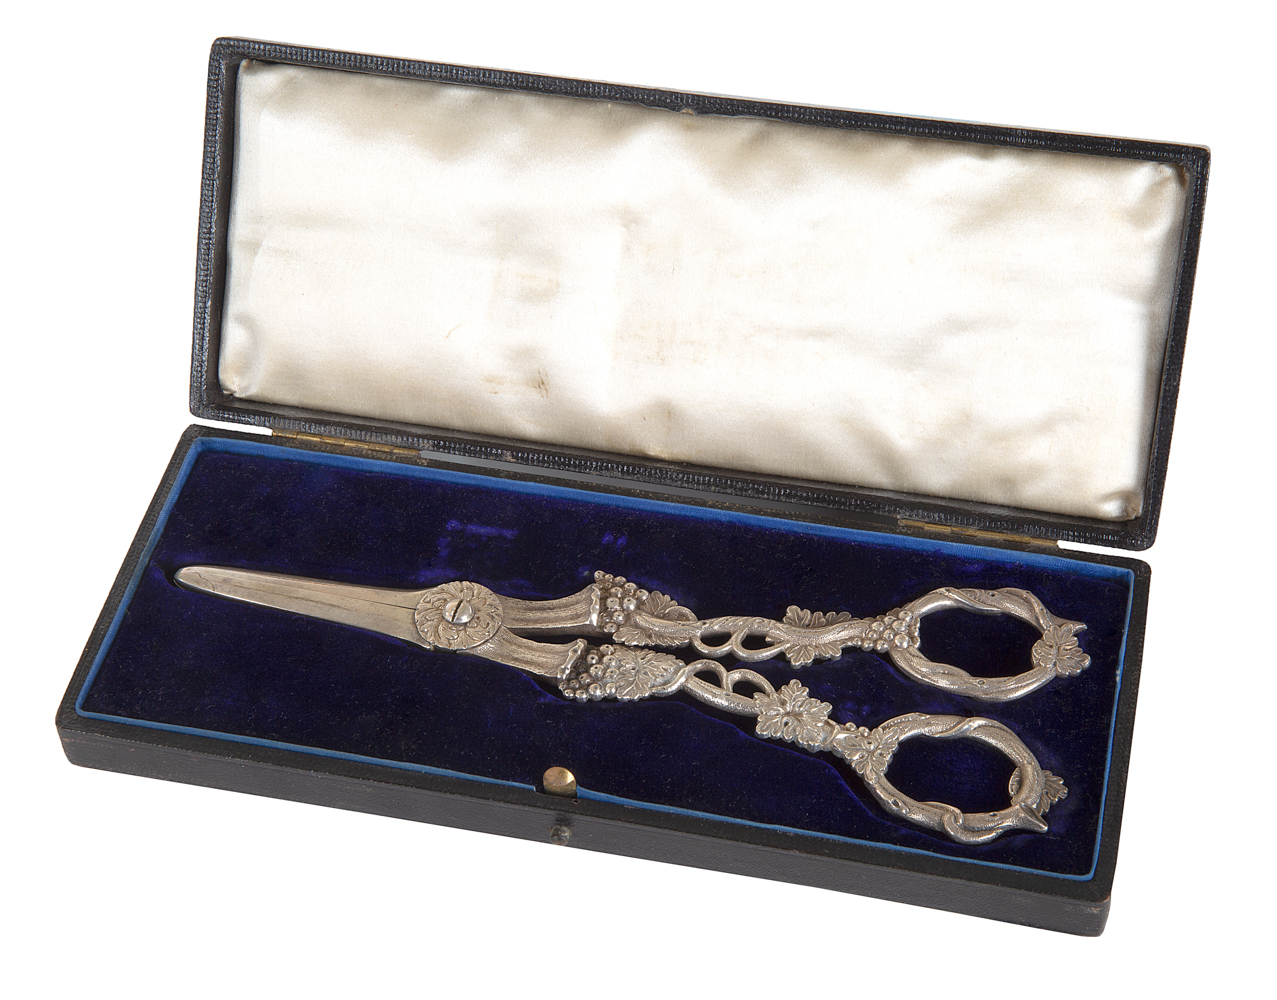 BRITISH SILVER SCISSORS, JAMES WOODING, BRITISH, EARLY 20TH CENTURY - Image 2 of 3